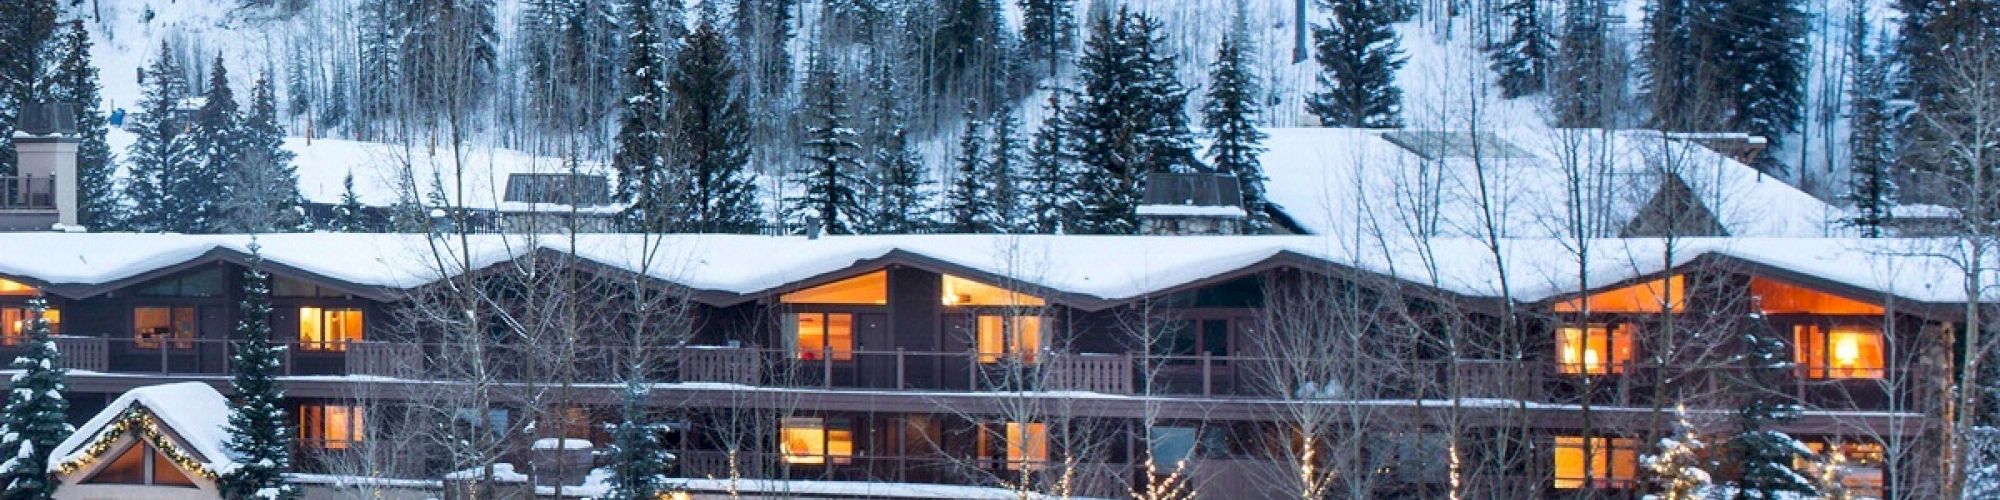 A cozy, illuminated lodge nestled in a snowy, forested mountain area, with ski lifts visible in the background.